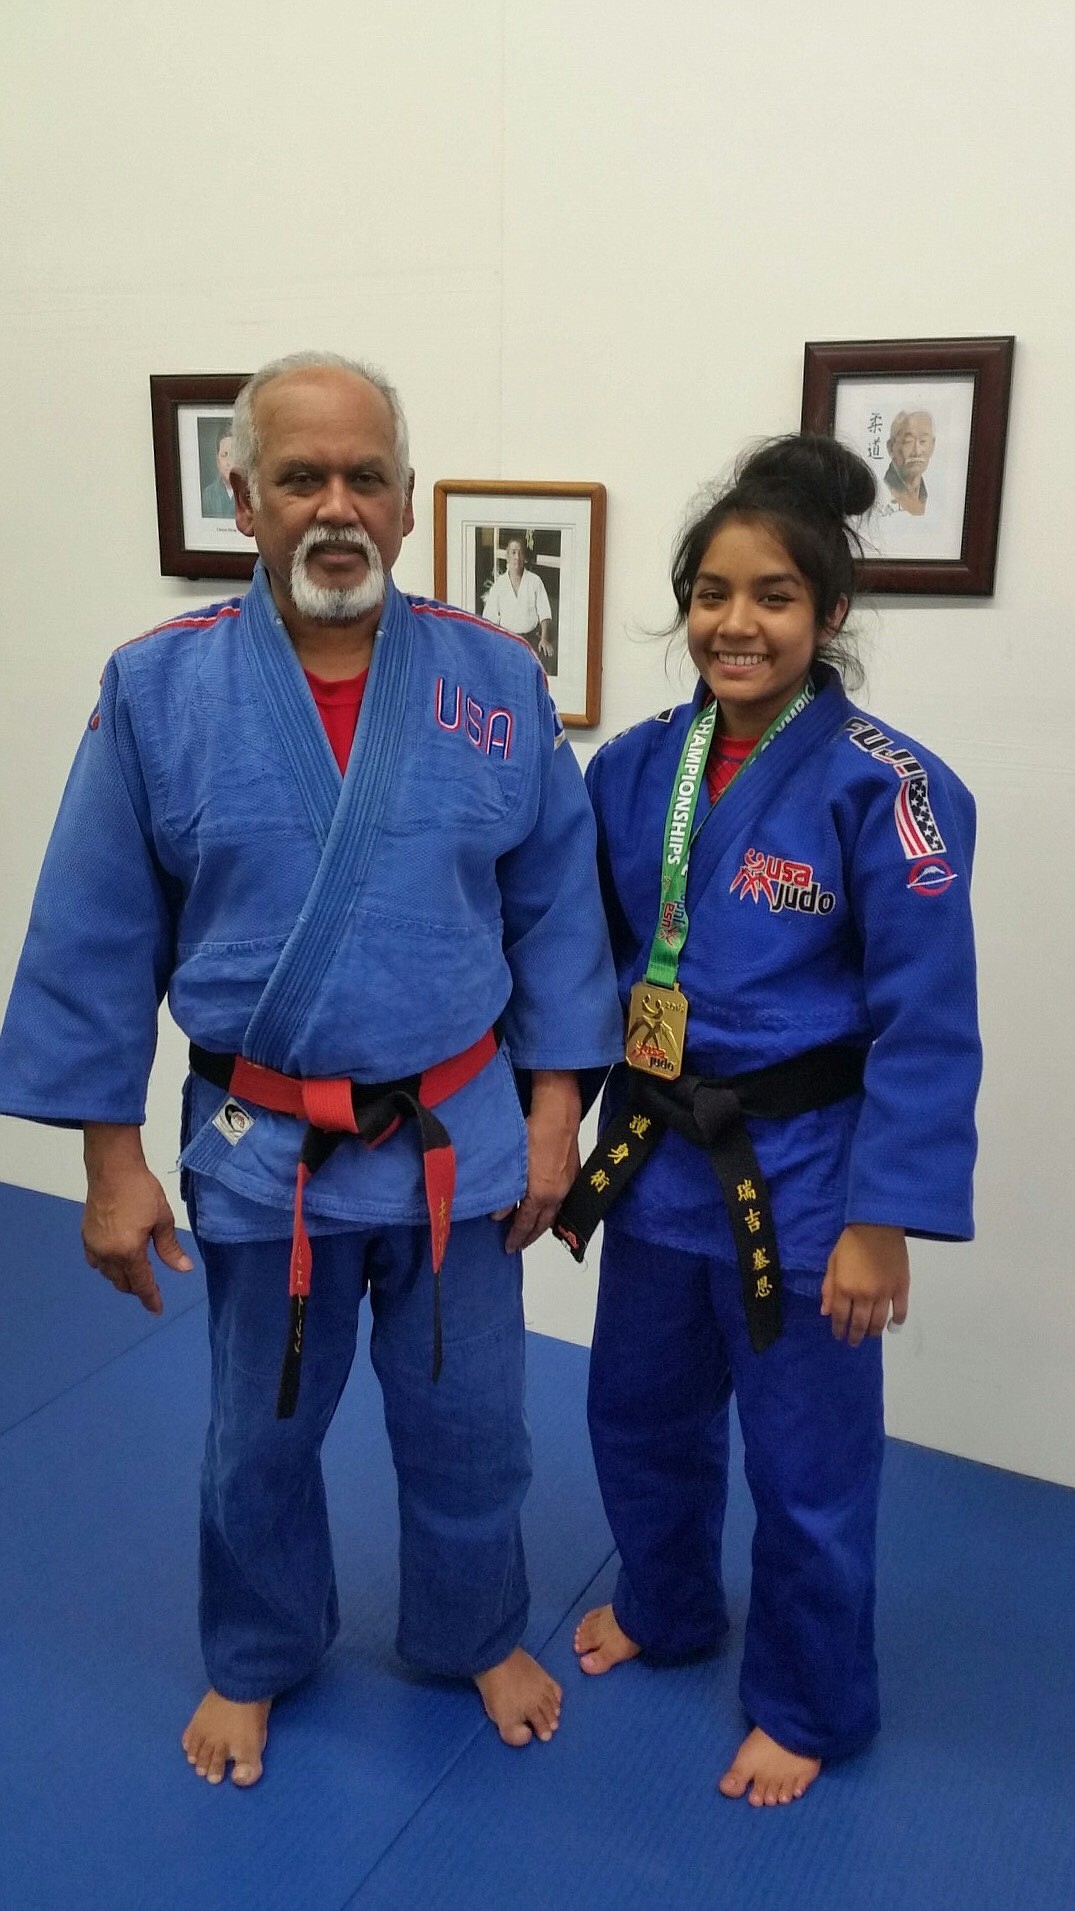 Courtesy photo
Raji Singh, right, representing the Goshinjitsu School in Post Falls at the Forge Fitness Center won the gold at the 2018 Junior Olympic championshisp in Spokane. At left is instructor Bijay Singh.